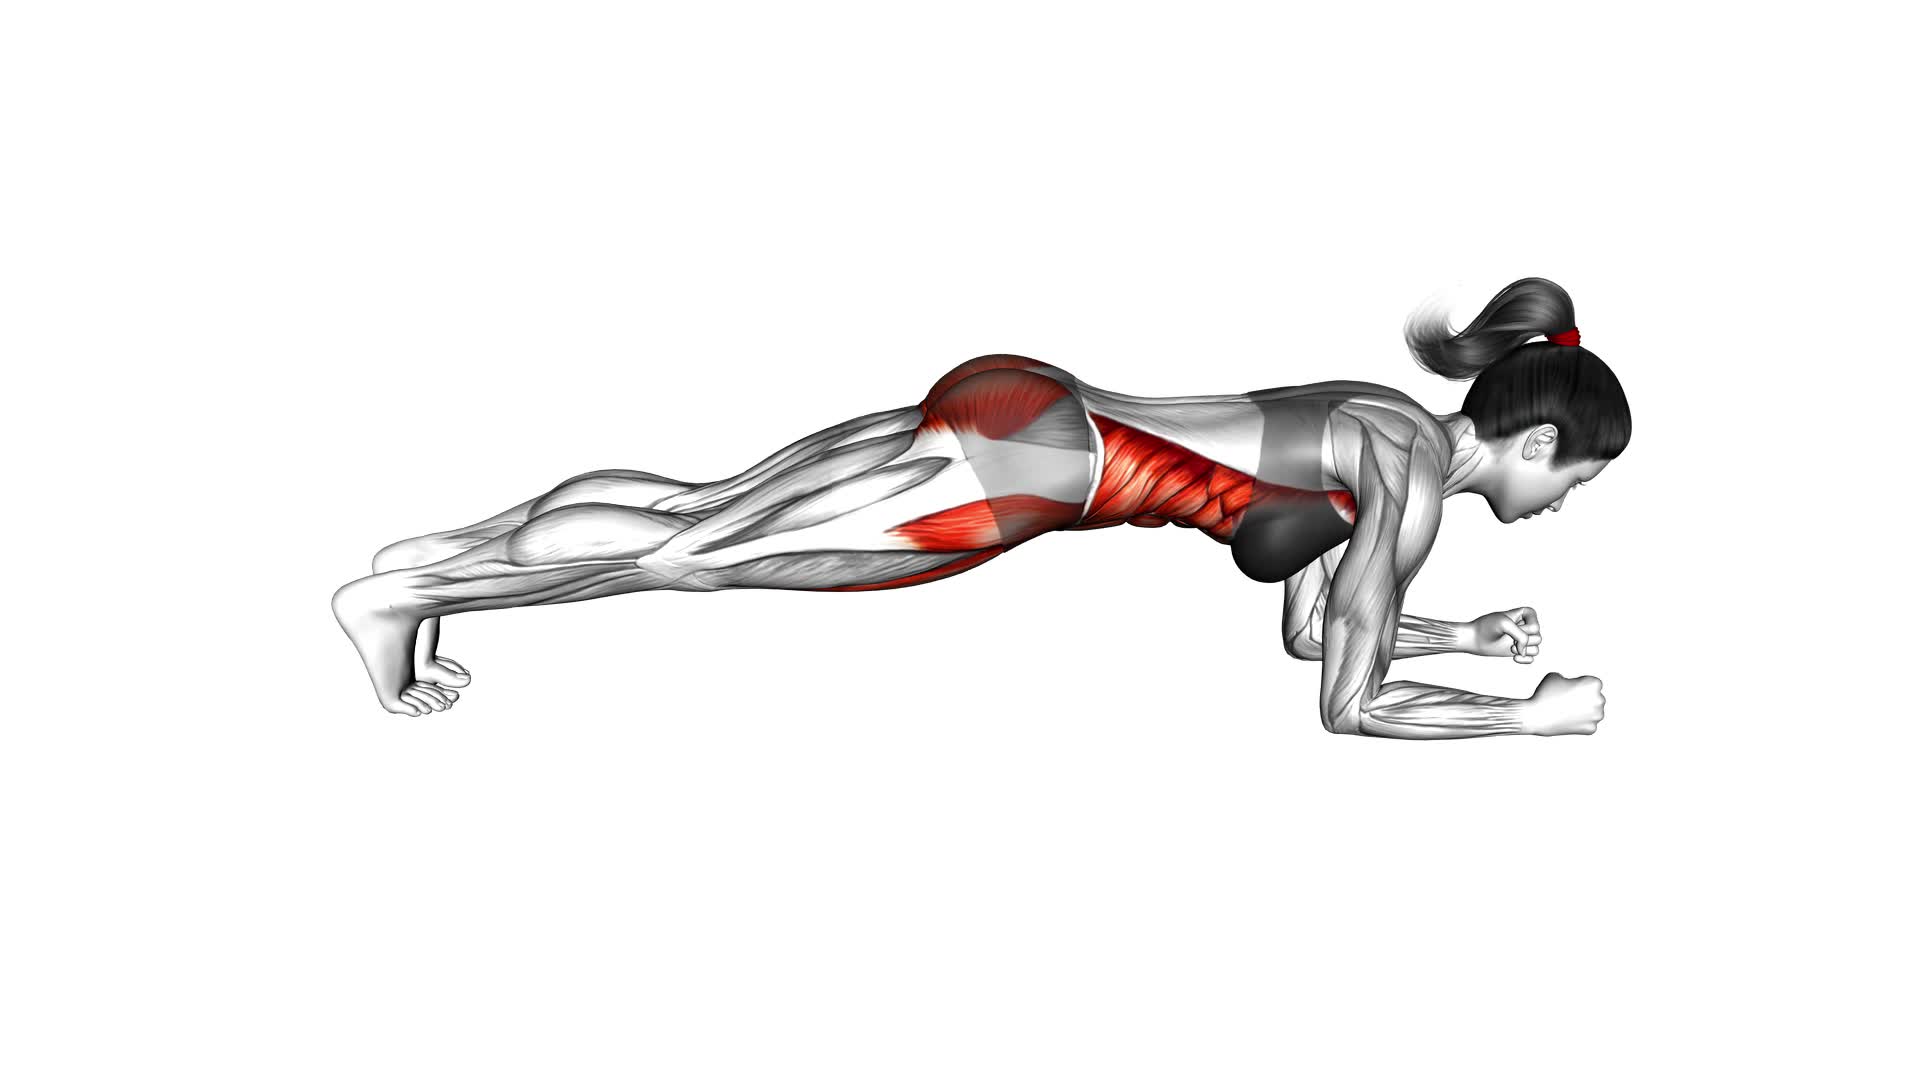 Forward Step Front Plank (female) - Video Exercise Guide & Tips